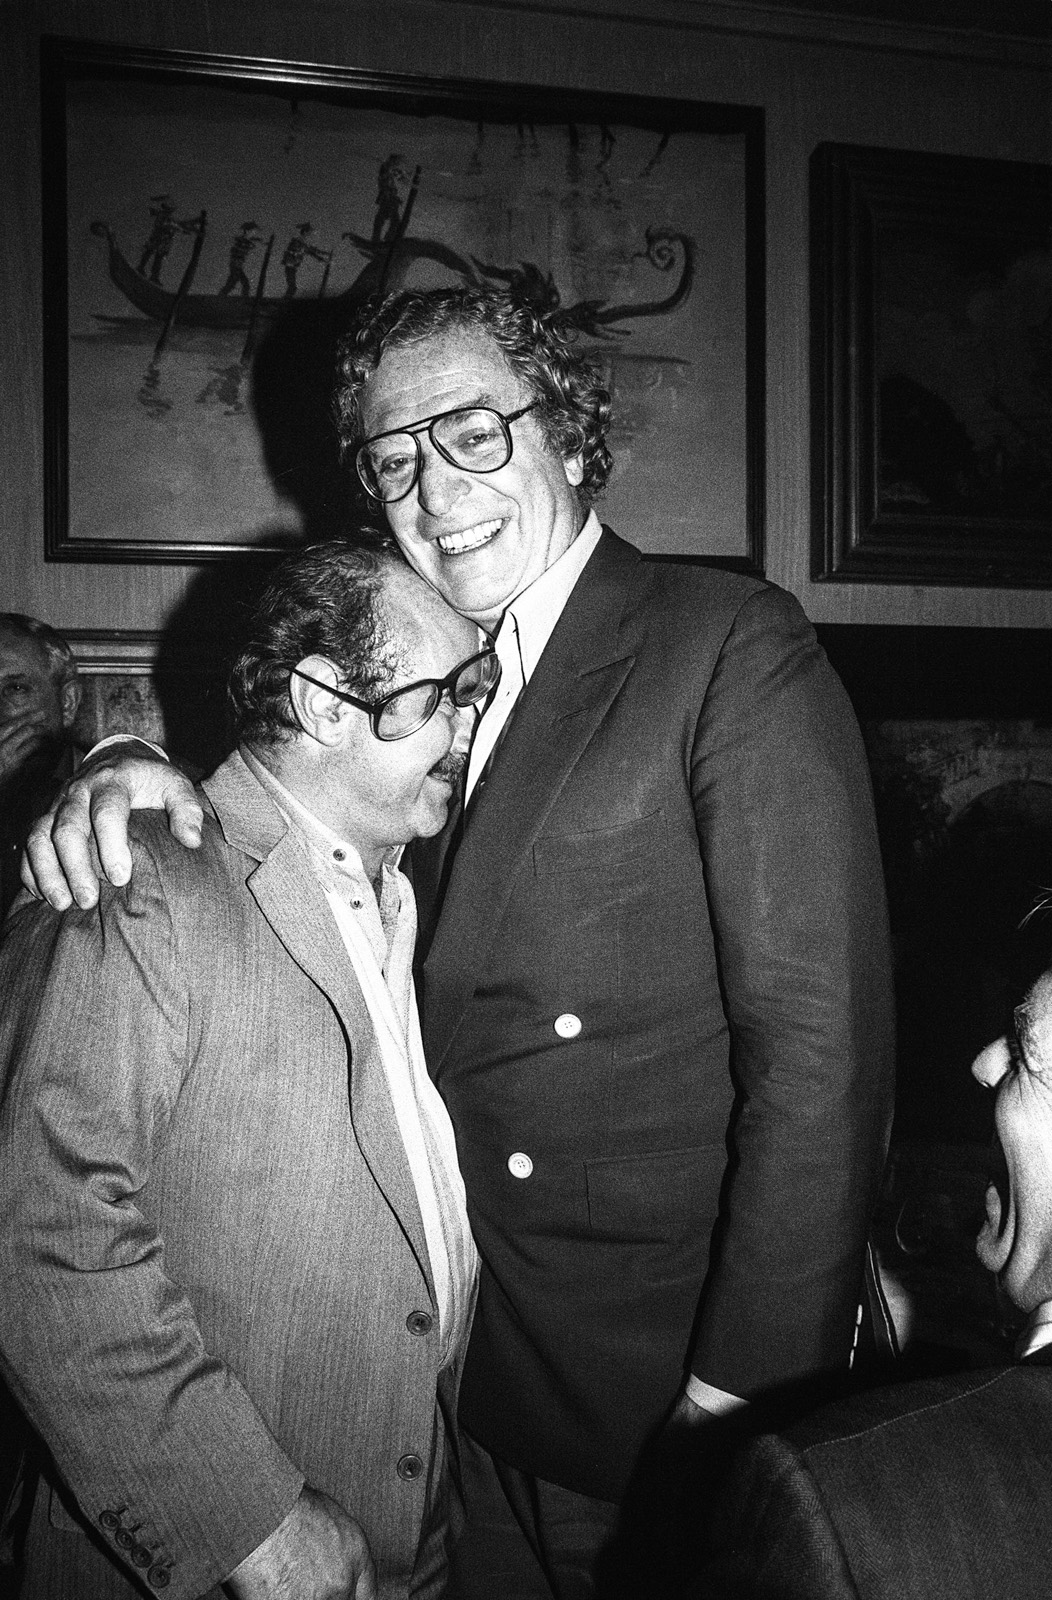 Bob Hoskins and Michael Caine have a big laugh knocking Hoskins glasses off as the 2 hang out with friends in the late 1970s.